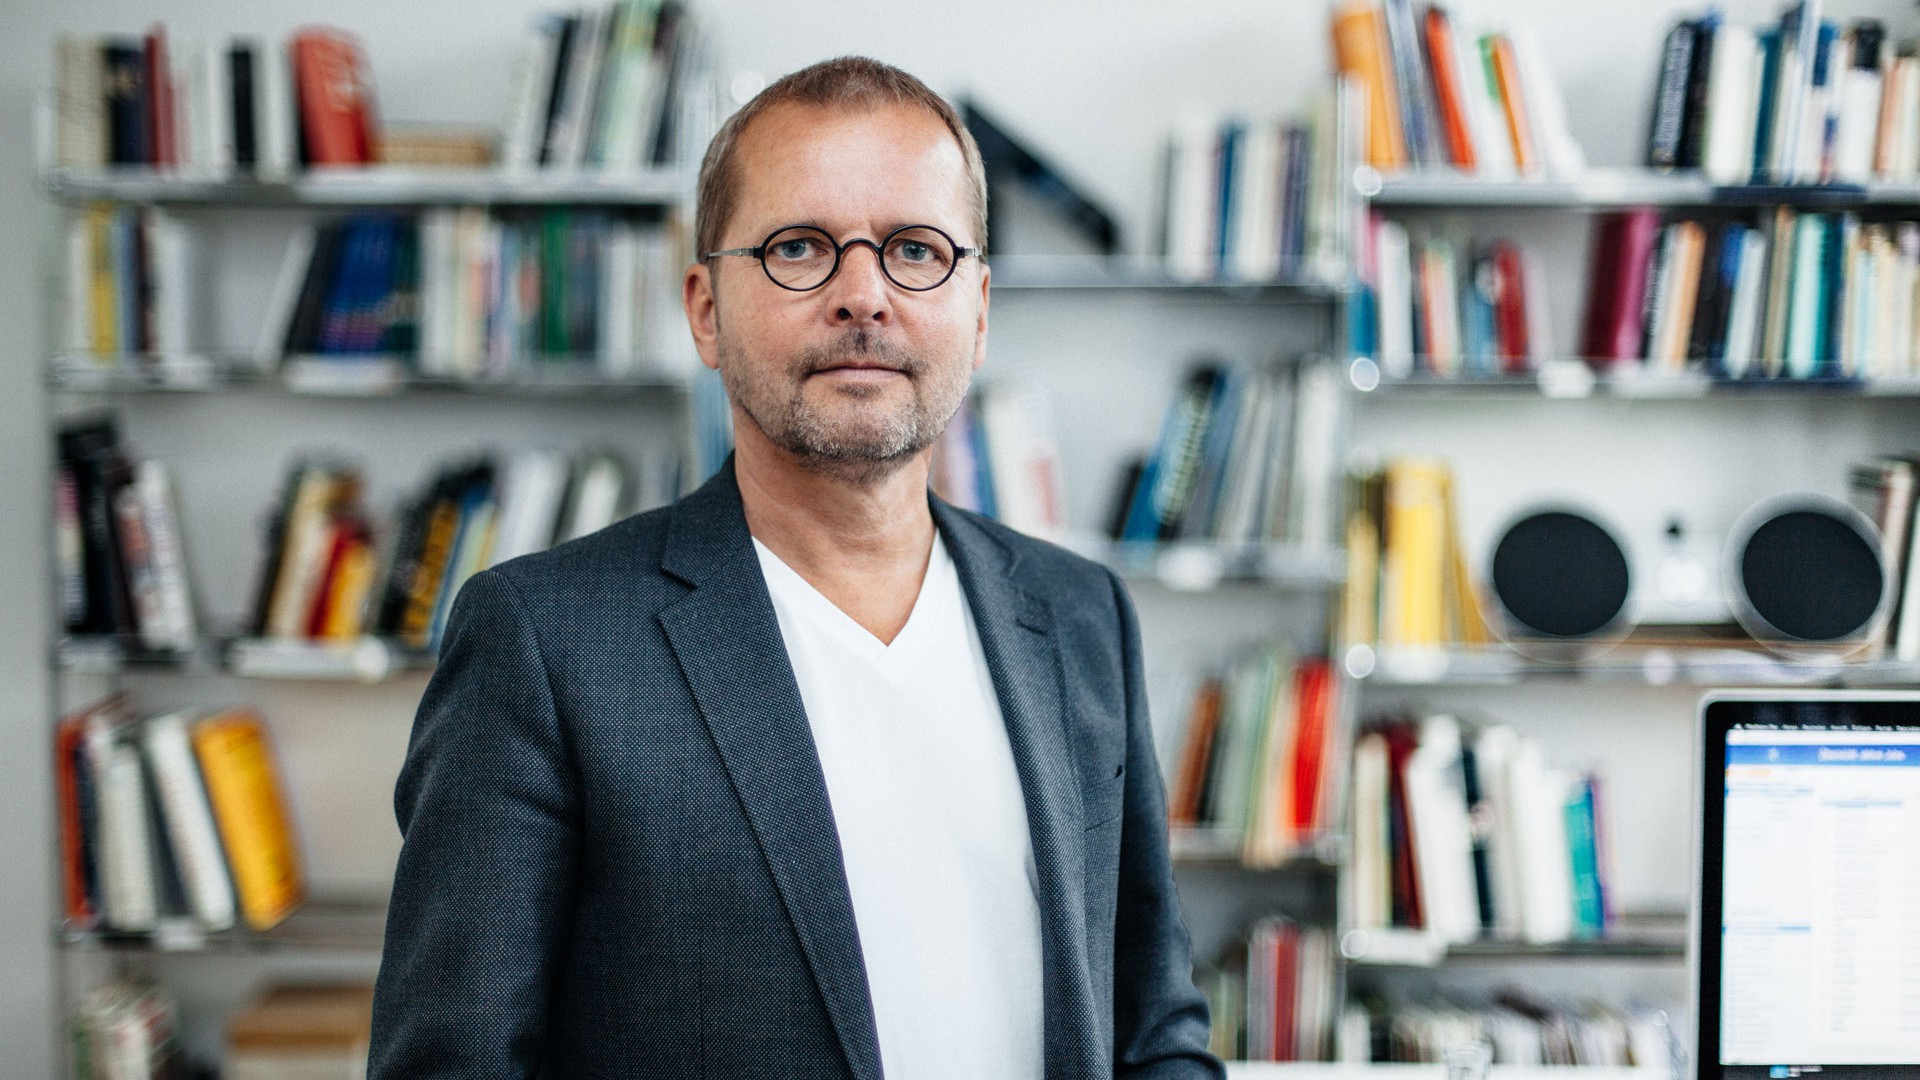 Florian is standing in front of the bookshelf in his office in a white T-shirt and dark jacket. He has a three-day beard and wears glasses with round lenses.